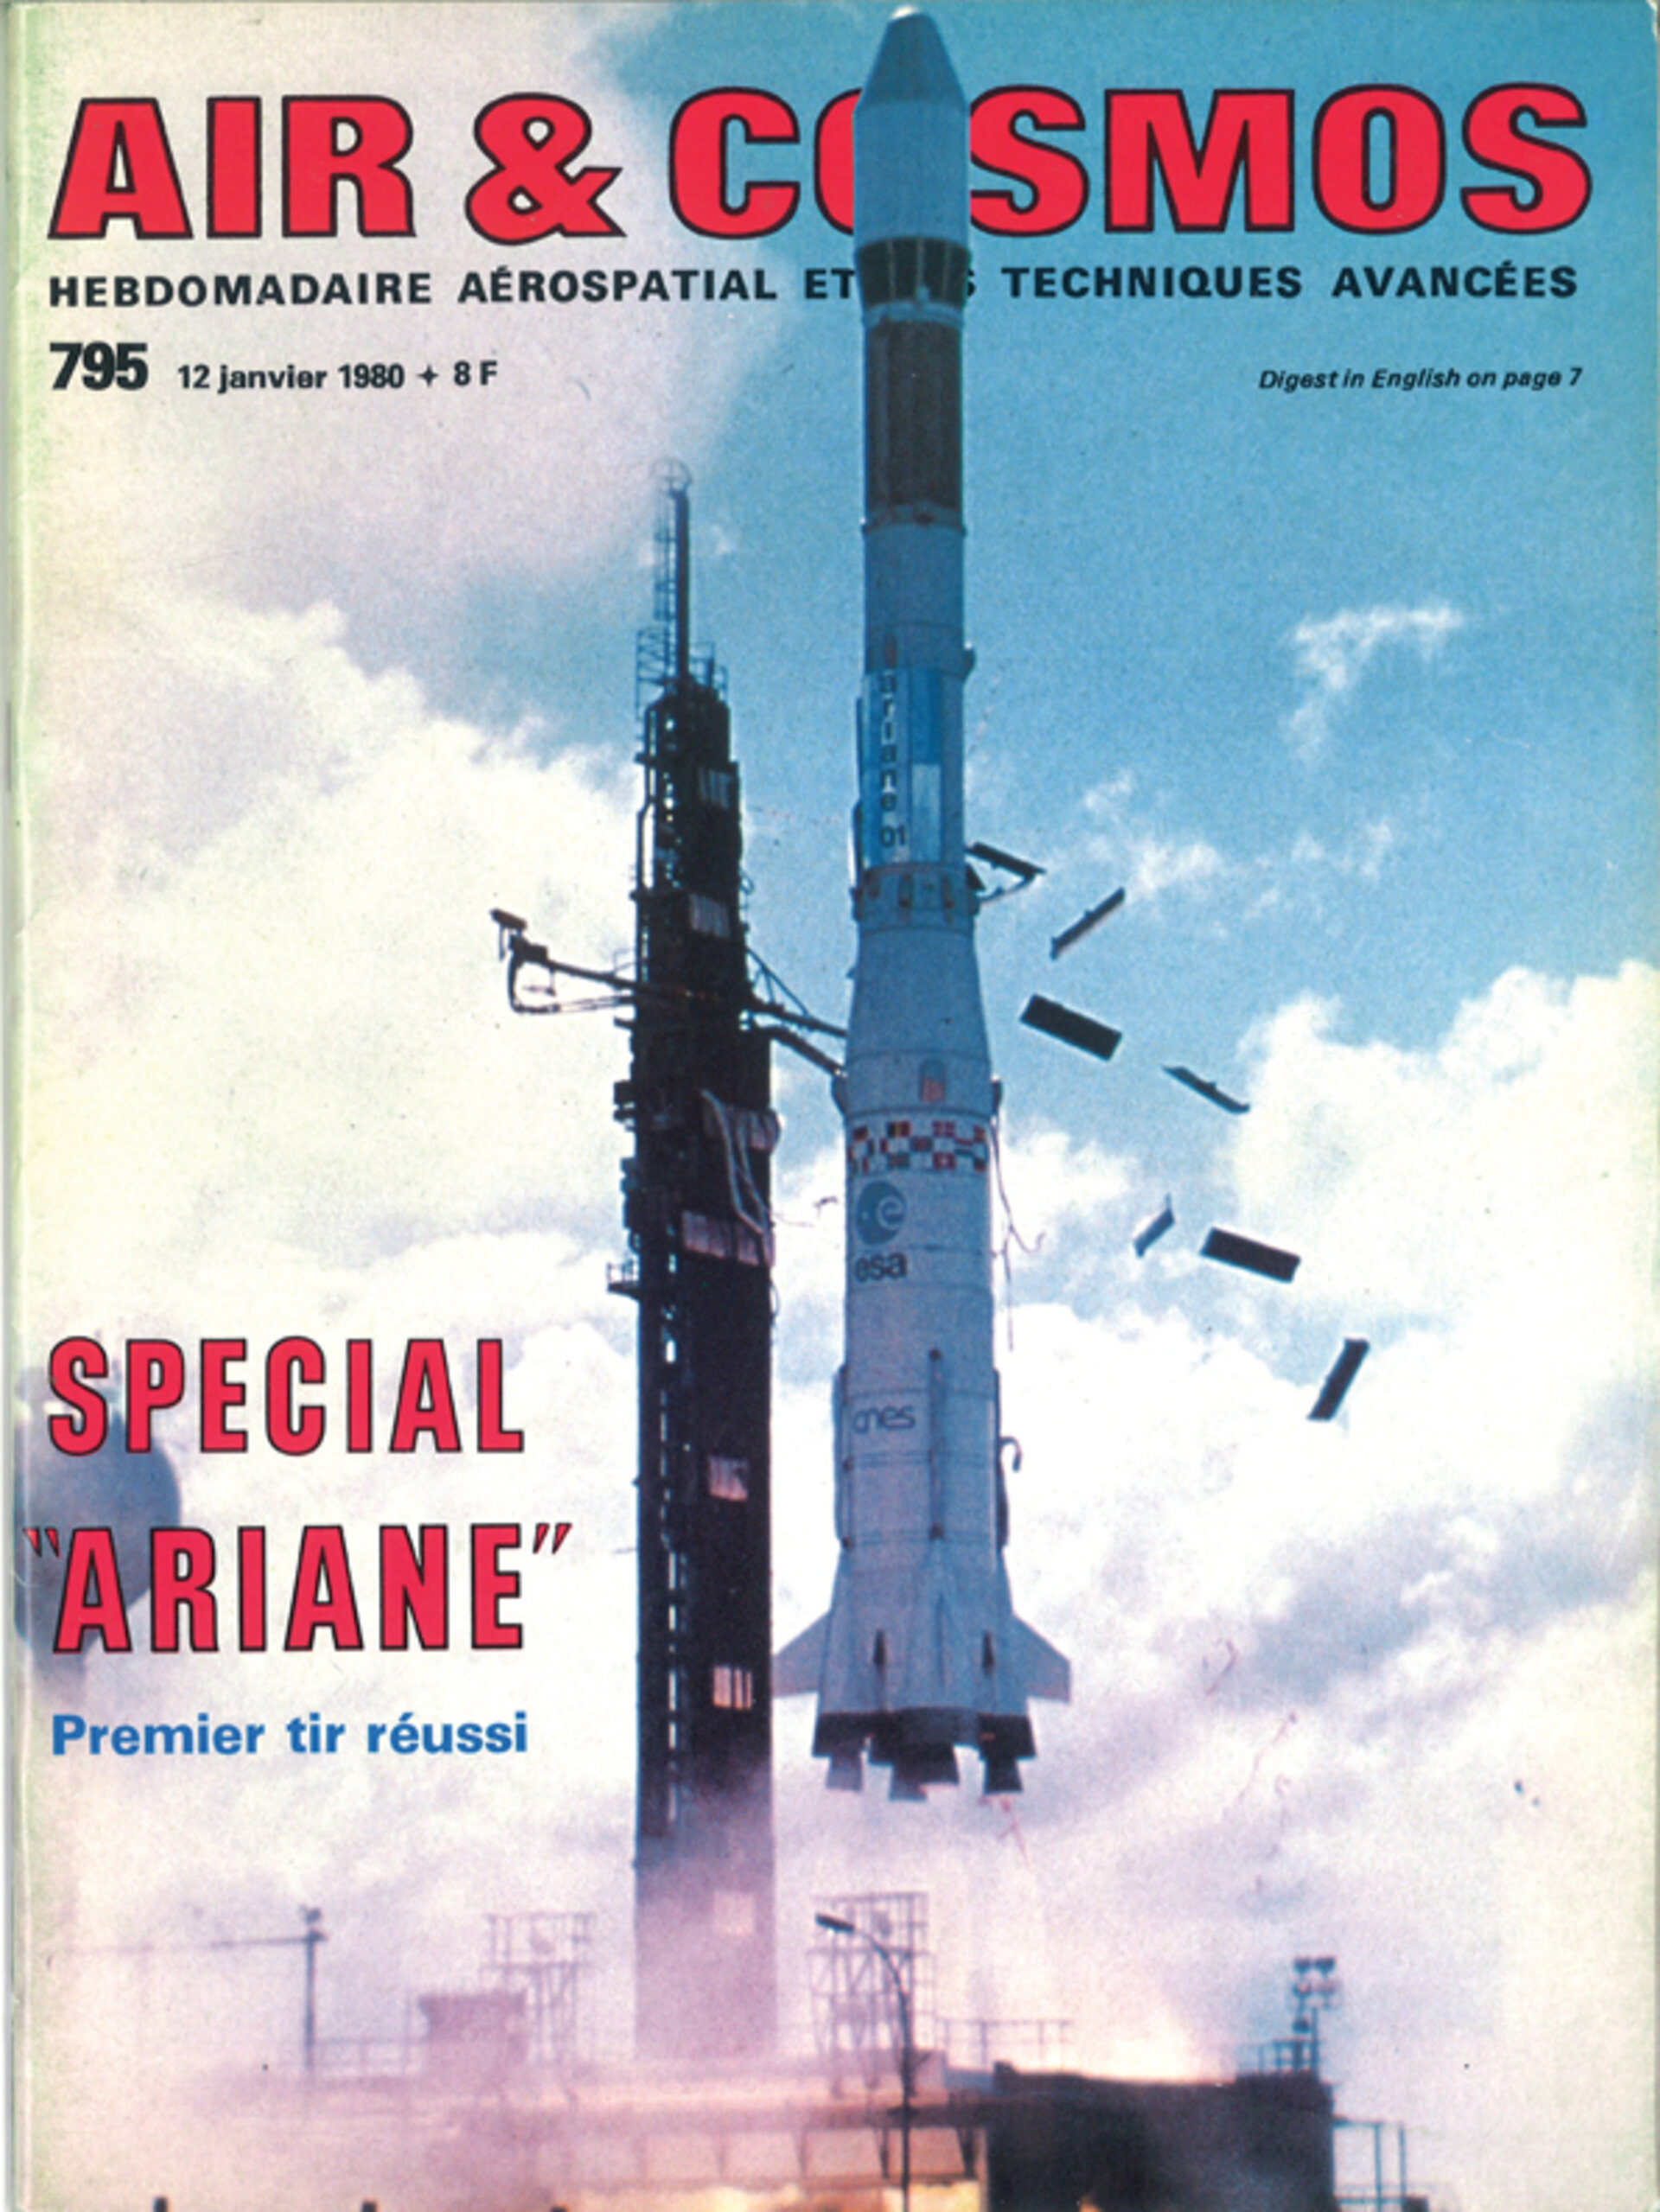 Air & Cosmos January 1980 edition cover